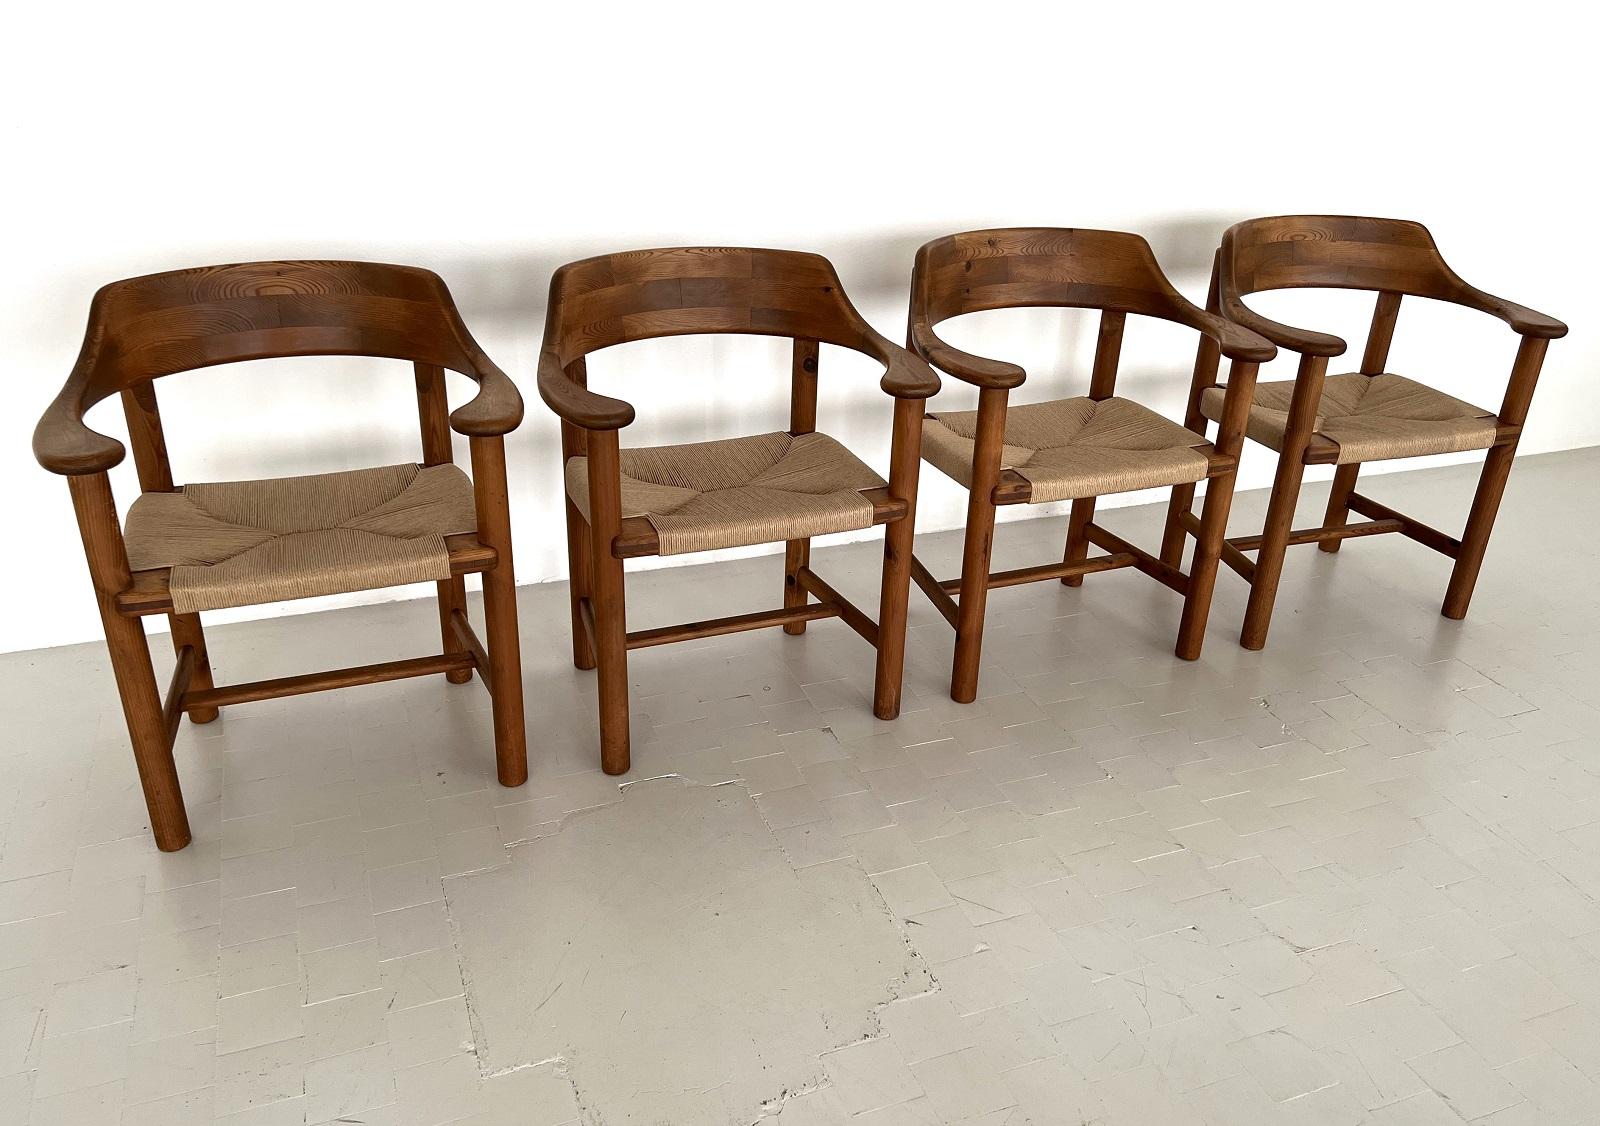 Rainer Daumiller Dining Chairs in Pine and New Paper Cord, 1970s For Sale 4